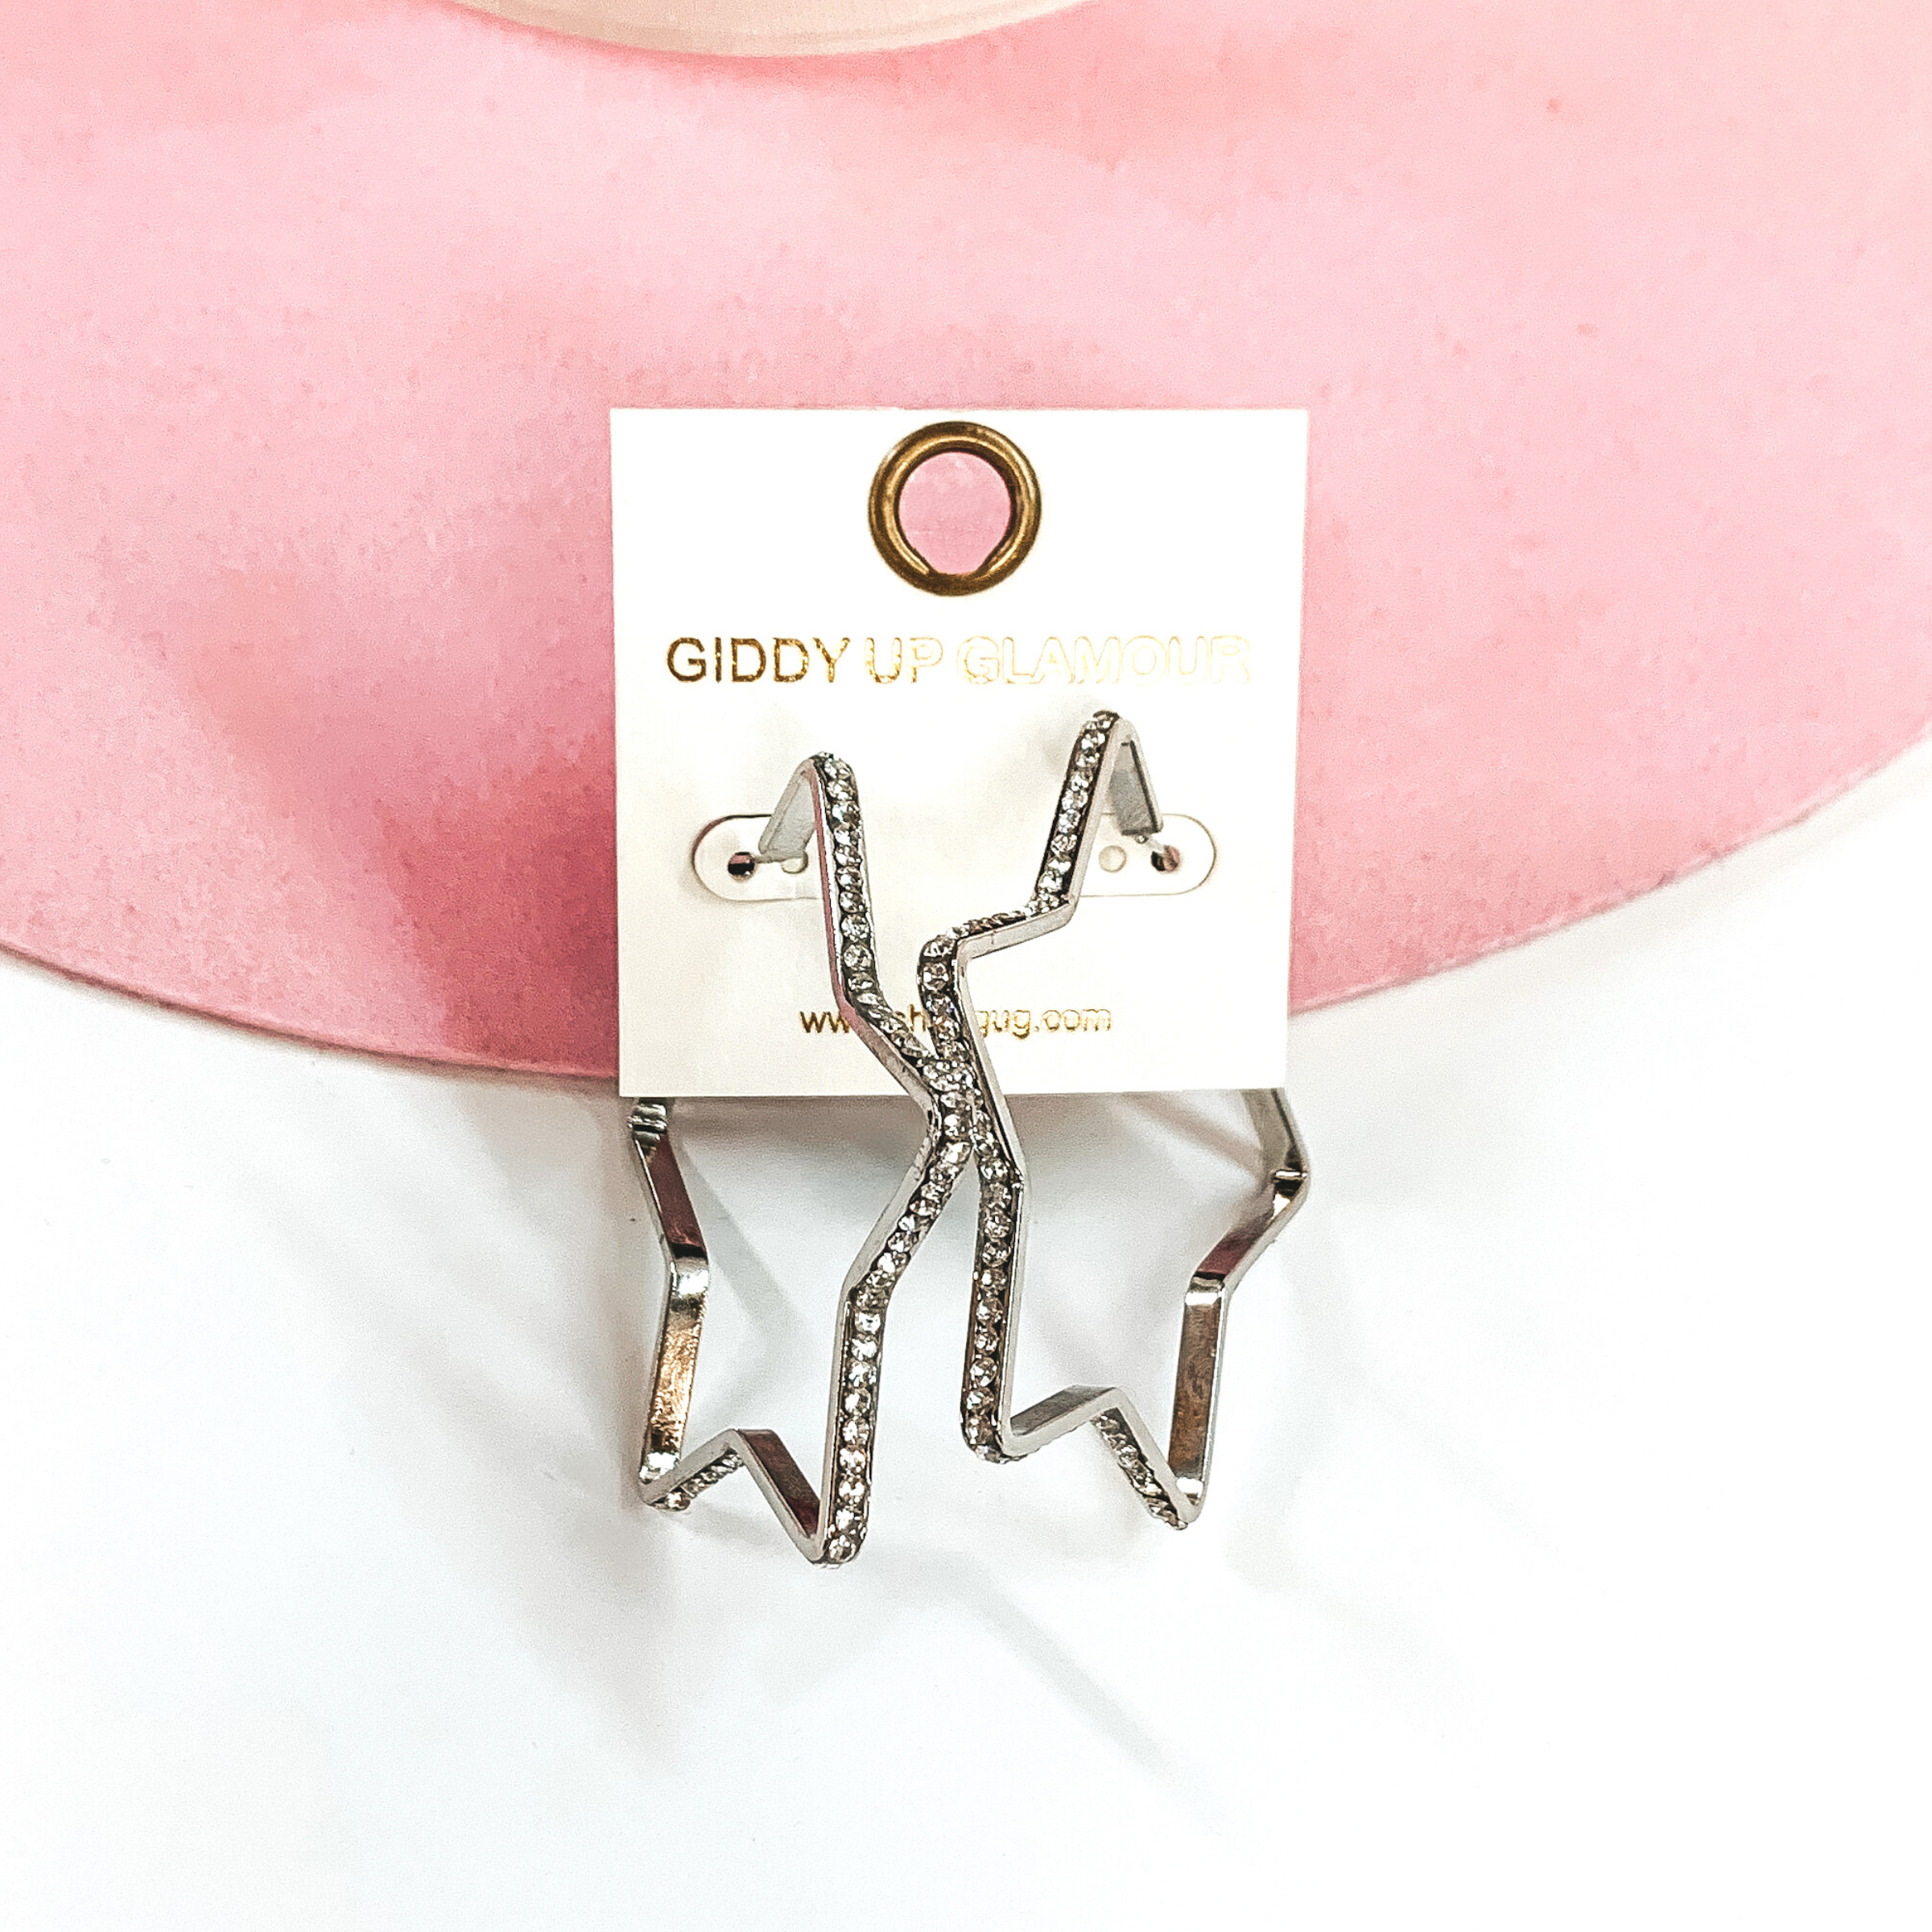 Star Shaped Hoop Earrings with Clear Crystals in Silver - Giddy Up Glamour Boutique